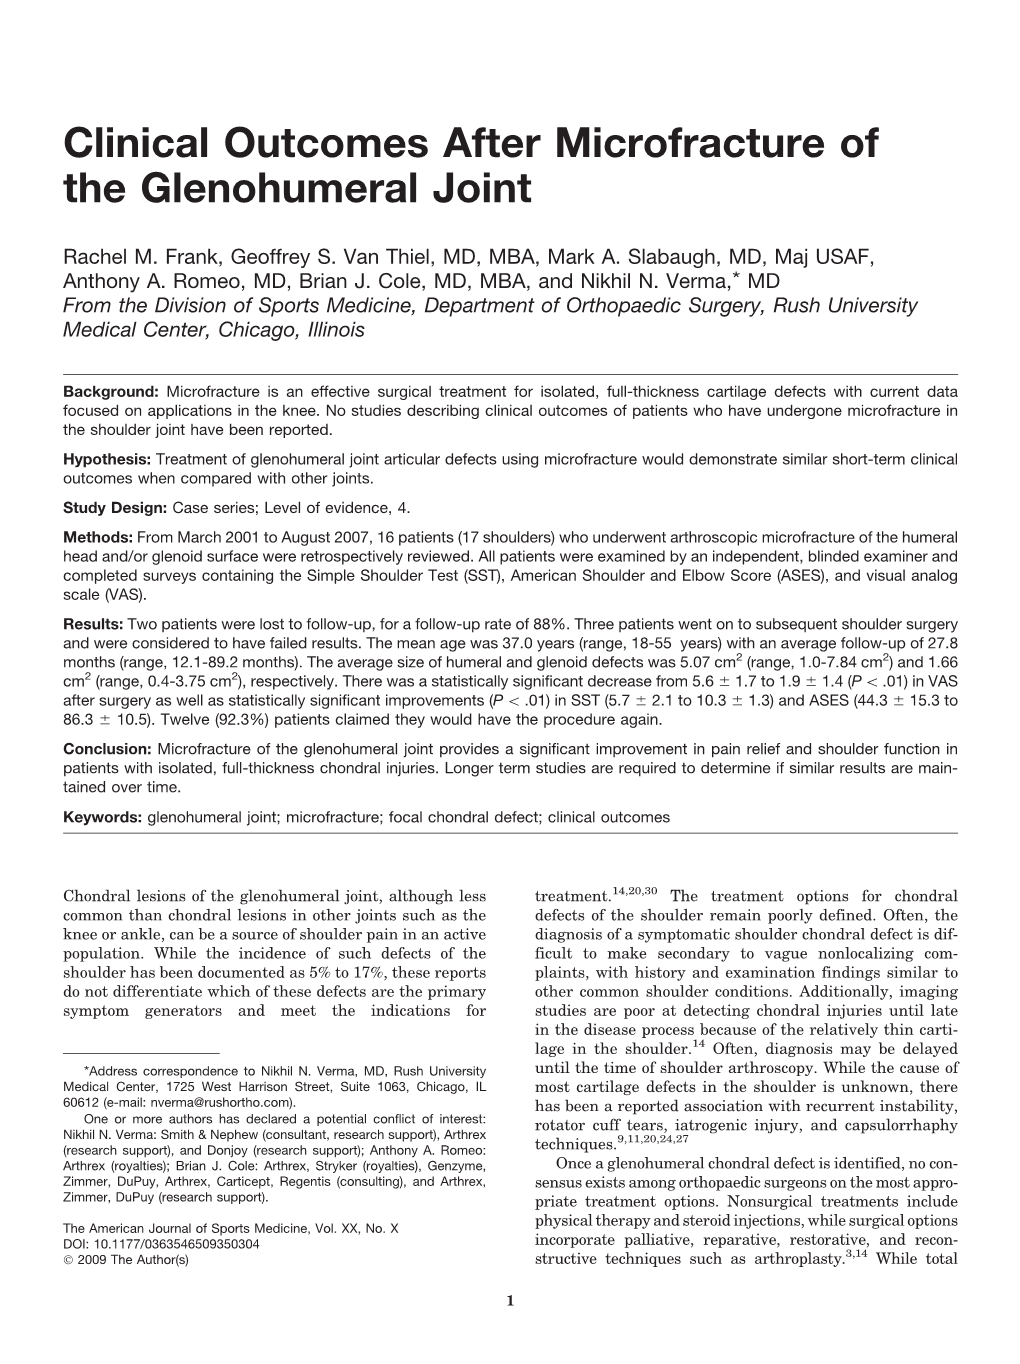 Clinical Outcomes After Microfracture of the Glenohumeral Joint